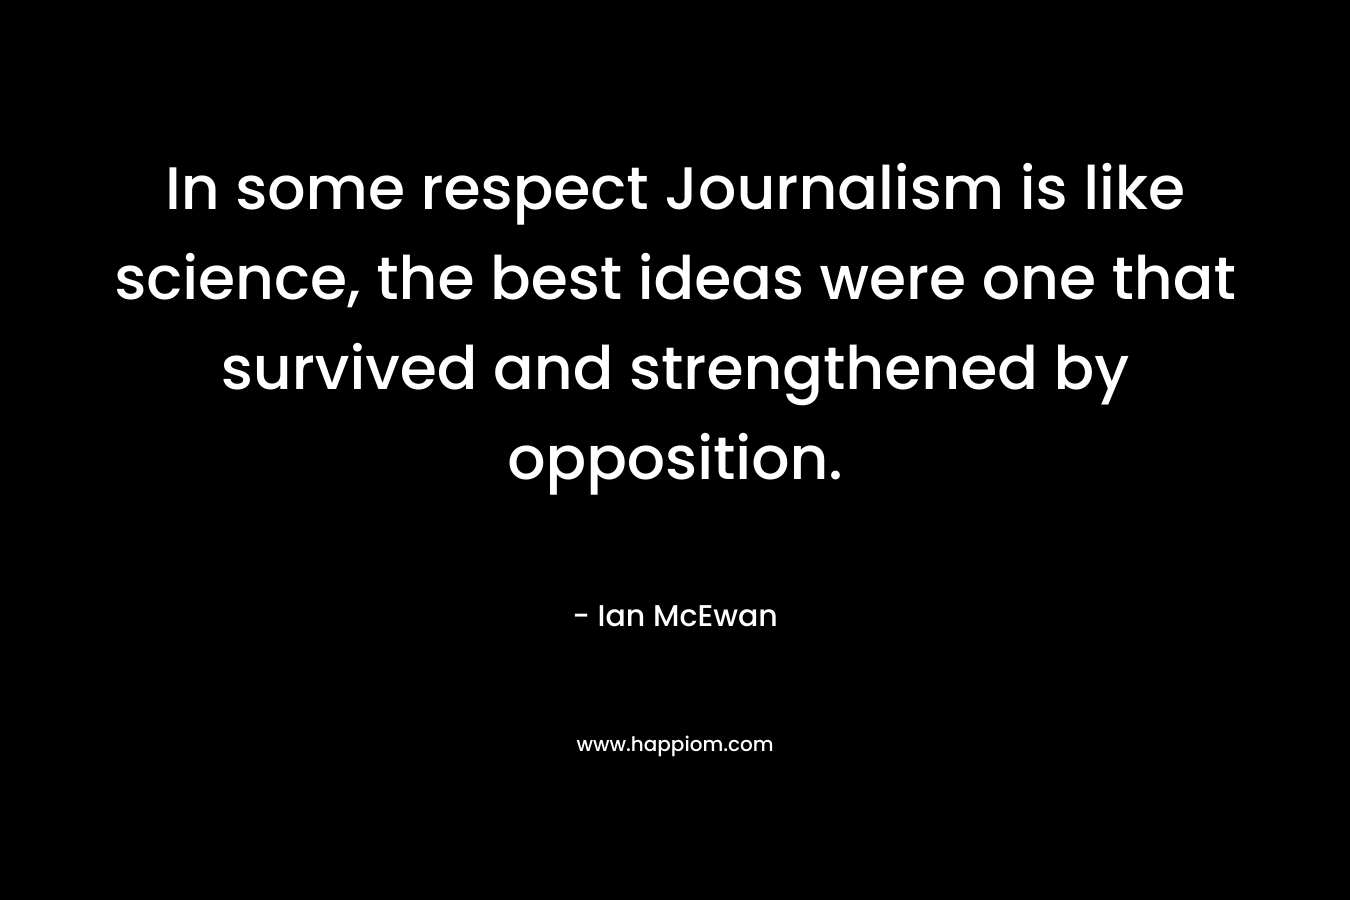 In some respect Journalism is like science, the best ideas were one that survived and strengthened by opposition. – Ian McEwan